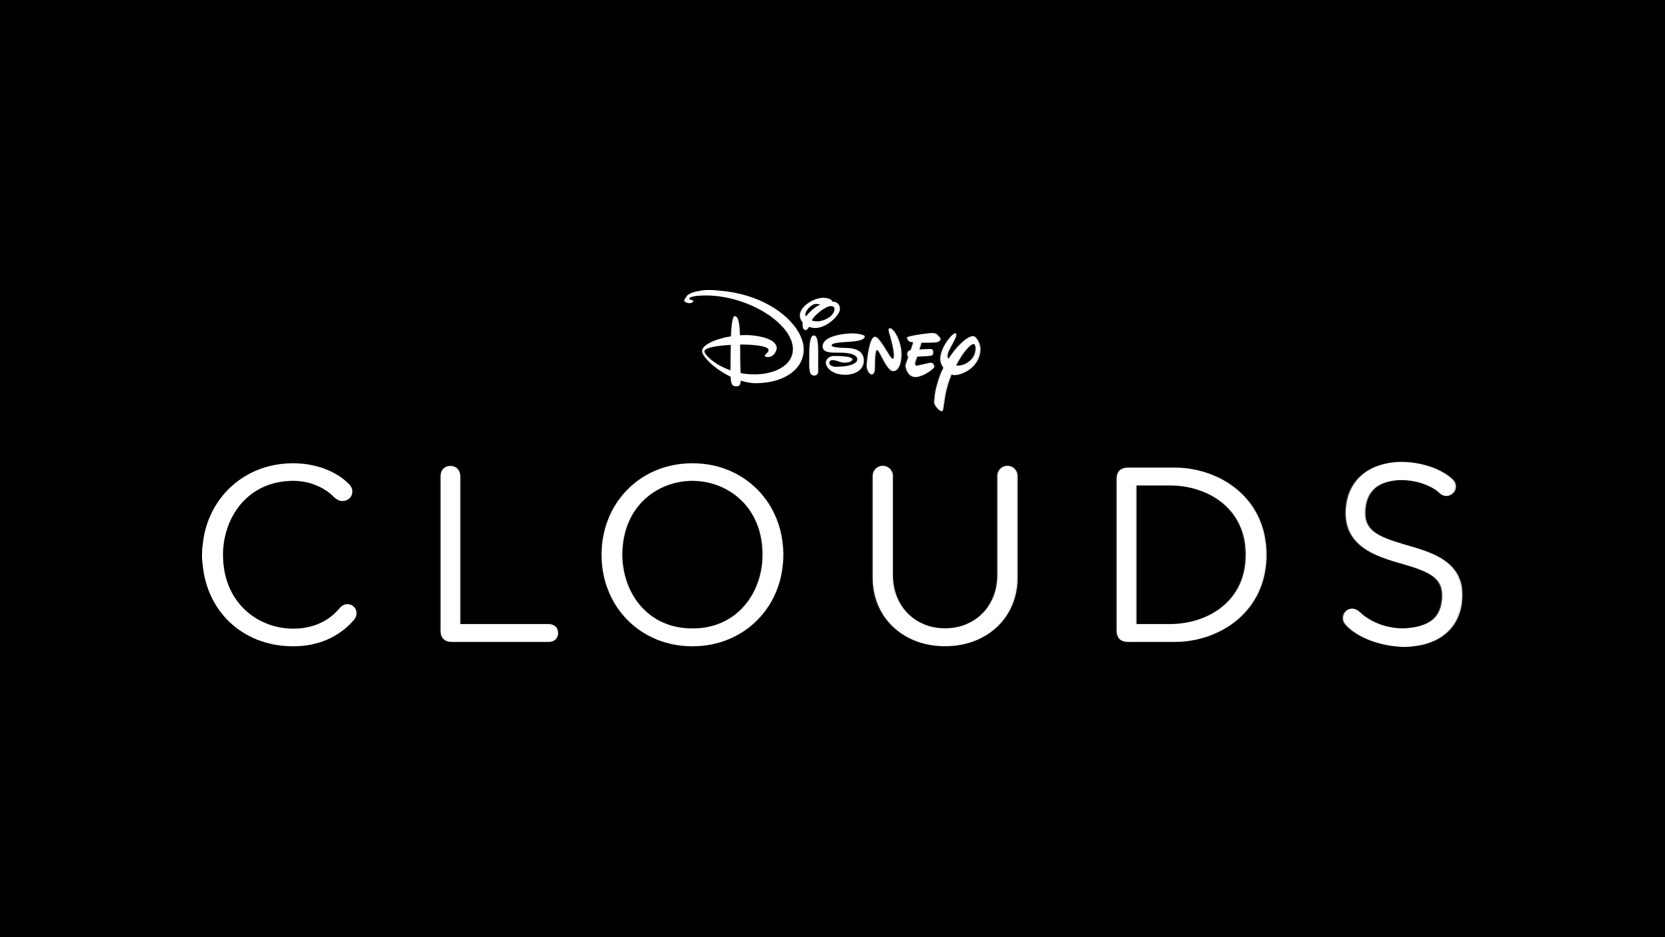 Disney+ original movie “Clouds” releases second trailer ahead of premiere on Friday, October 16 